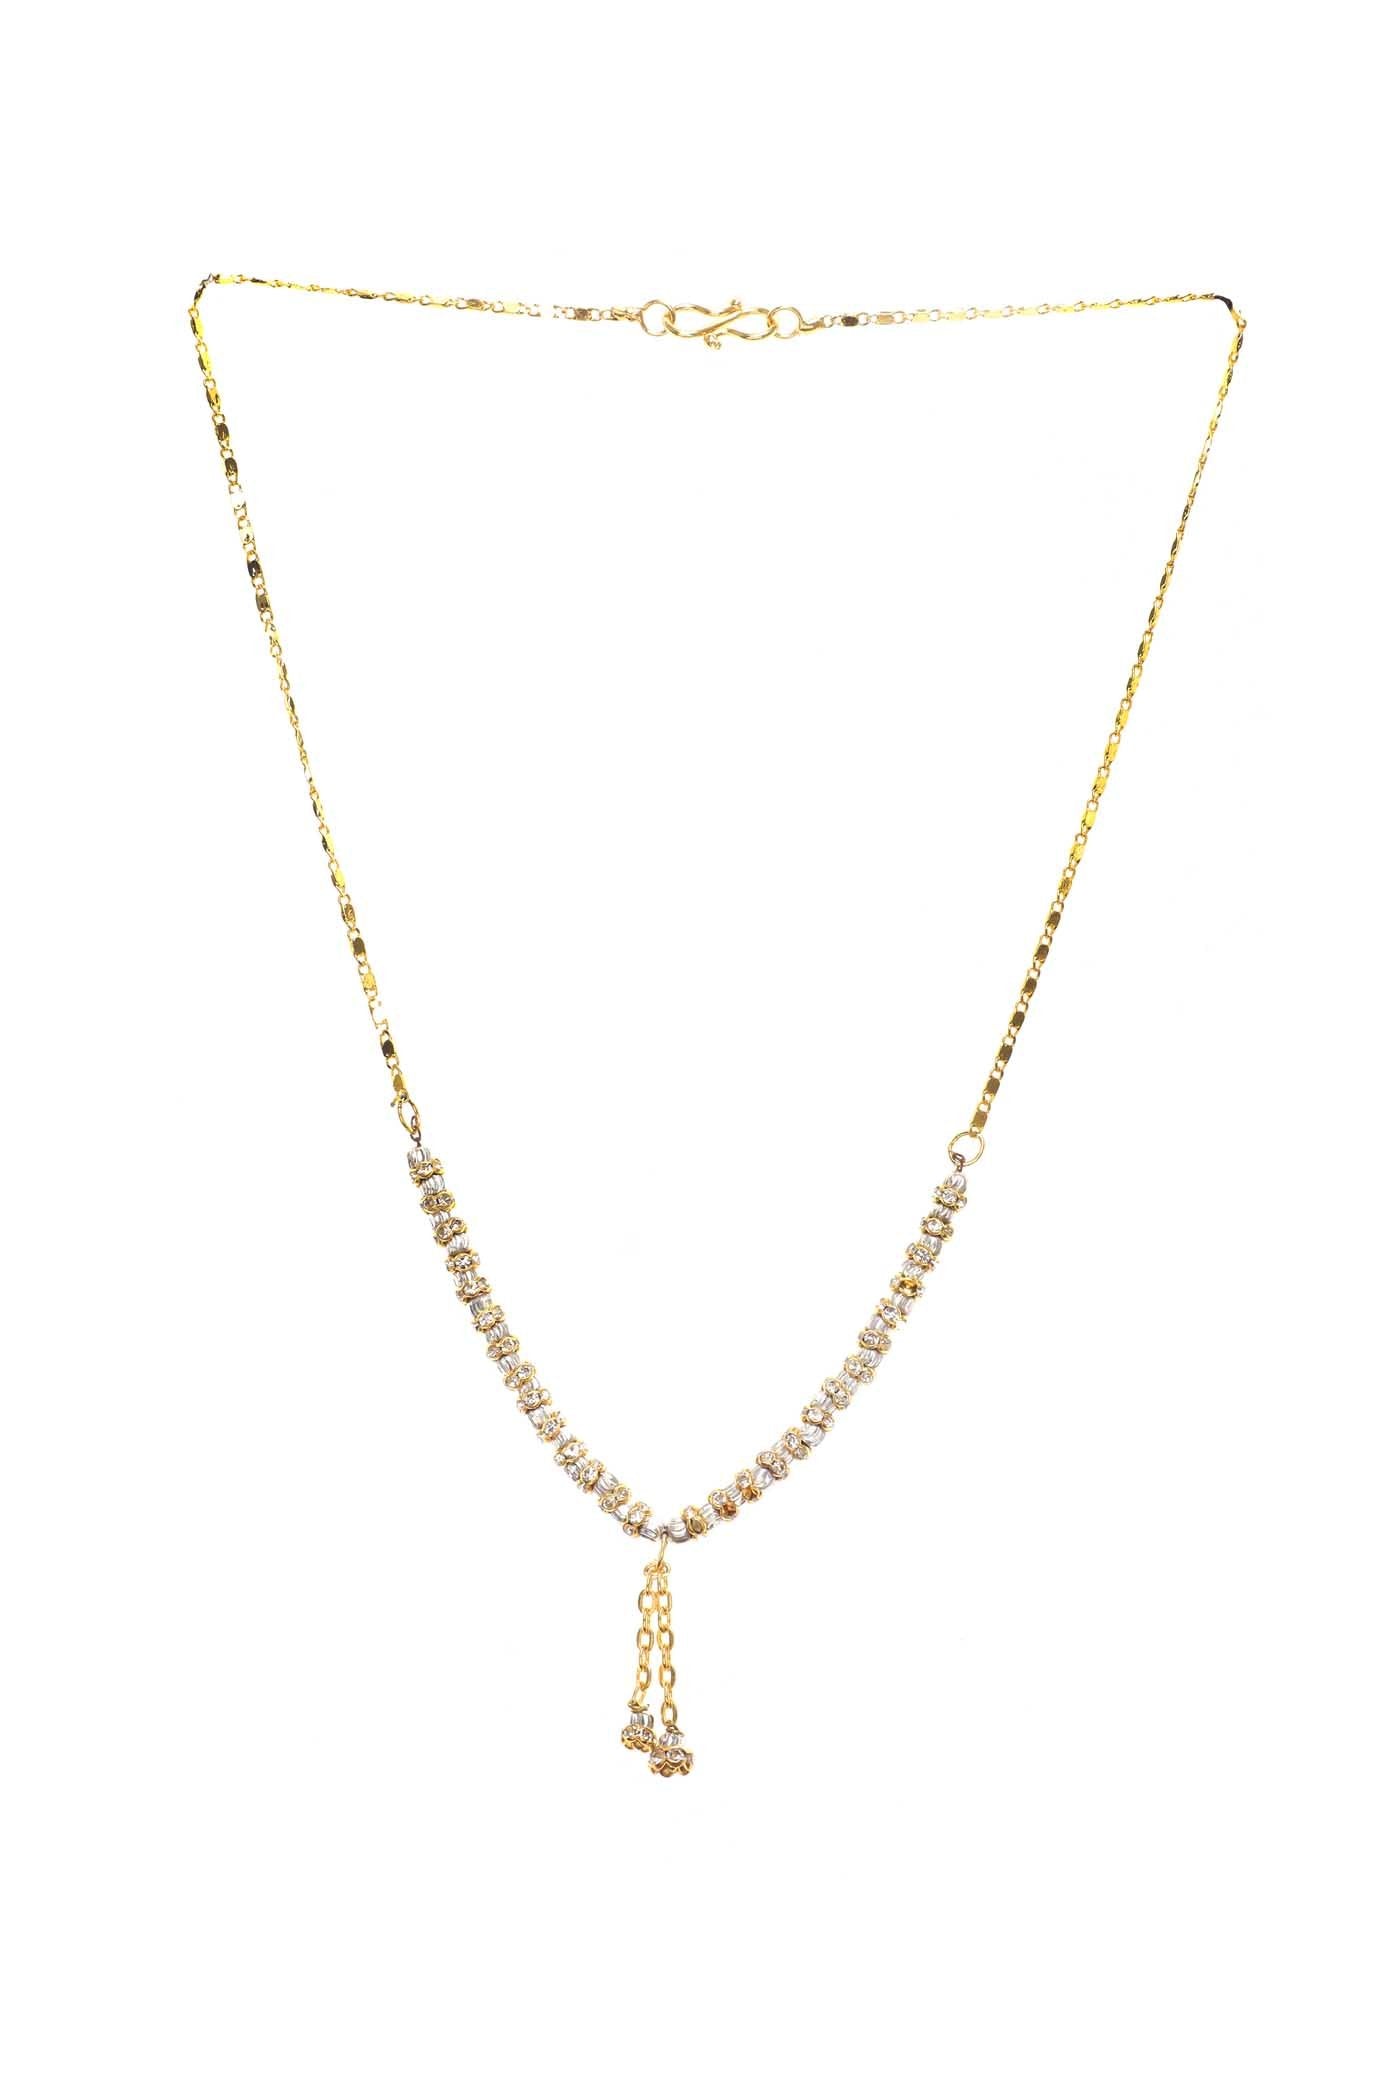 Indian Jewellery from Meira Jewellery:Chain Necklace,Trendy Golden Chain Necklace MJ-DOK-HD-071BG